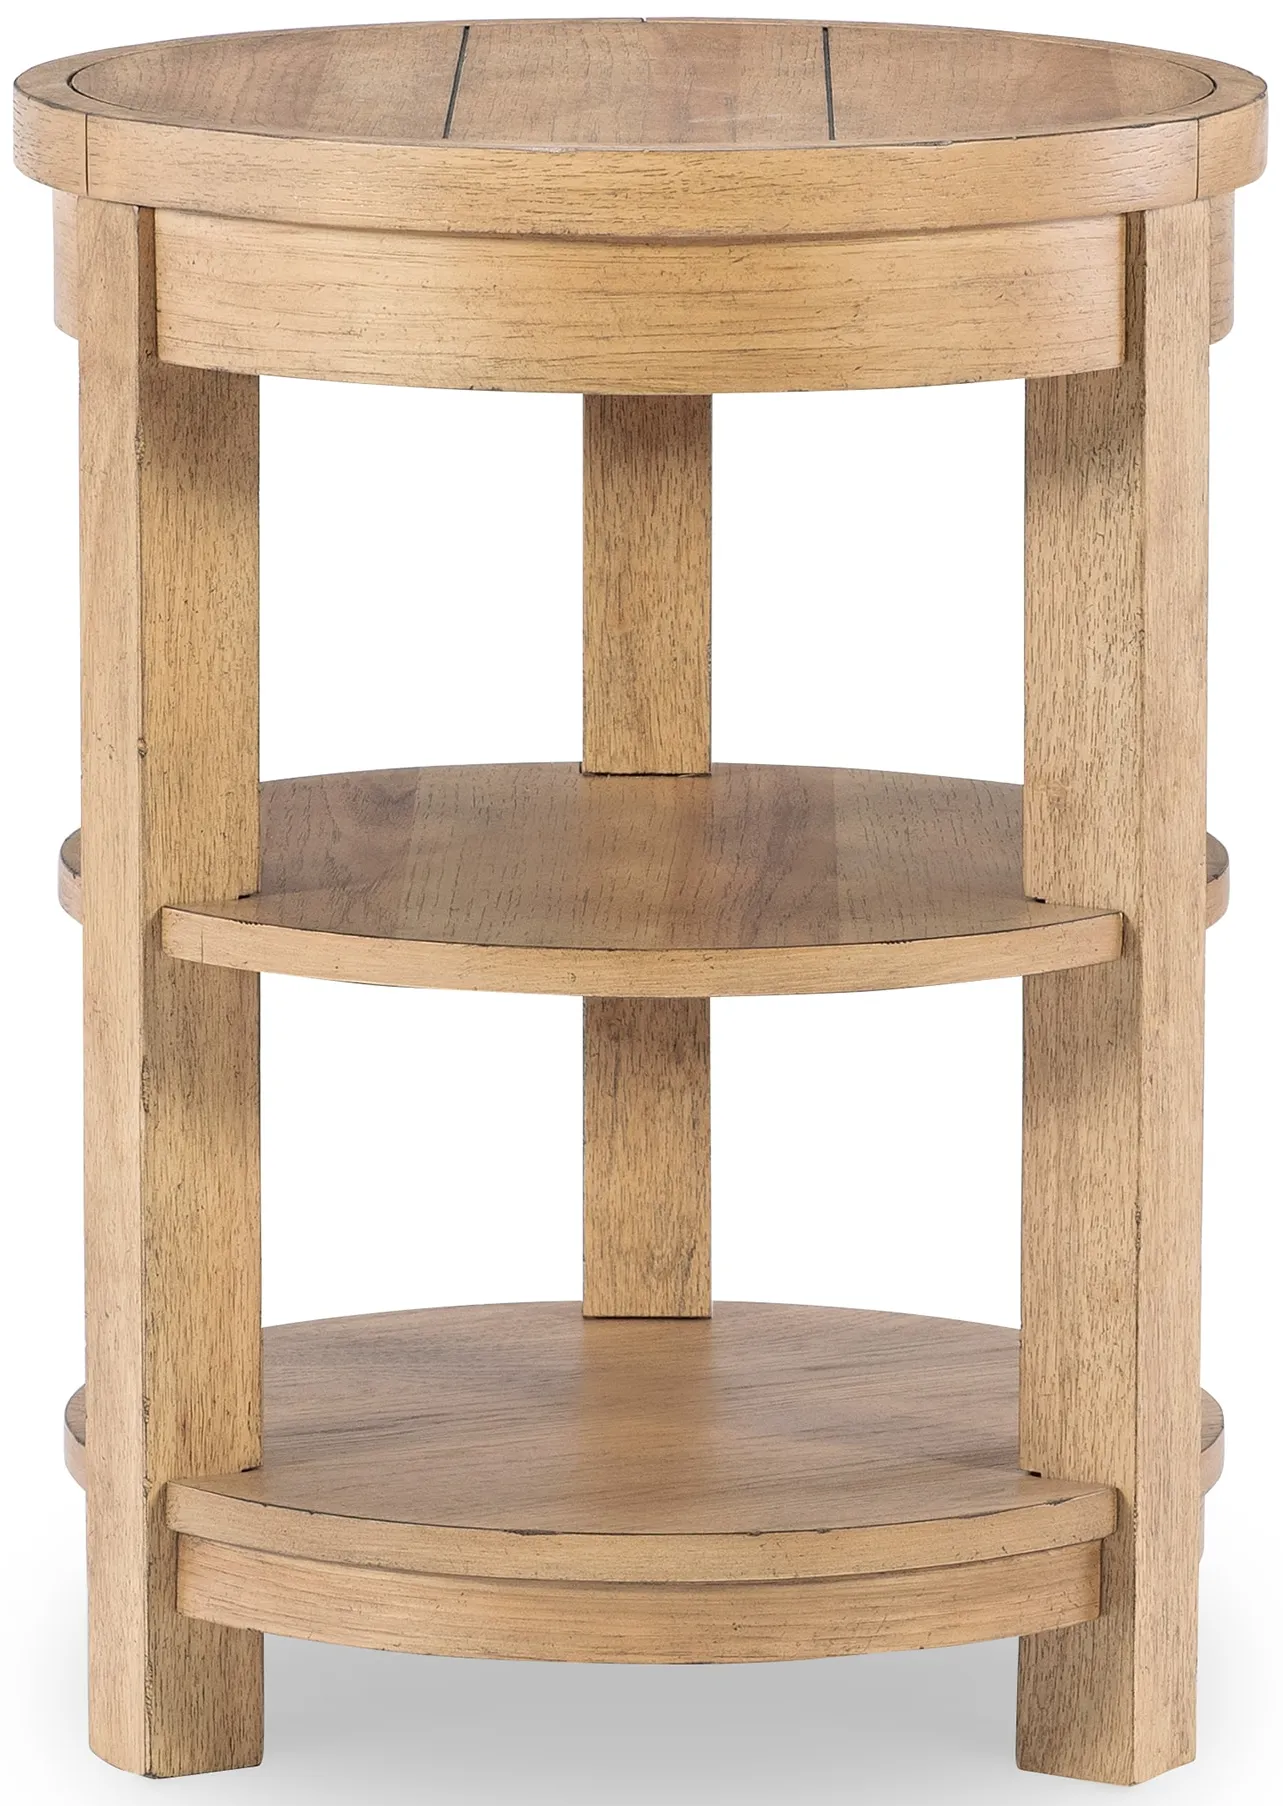 Traditions Hickory Round Chairside Table